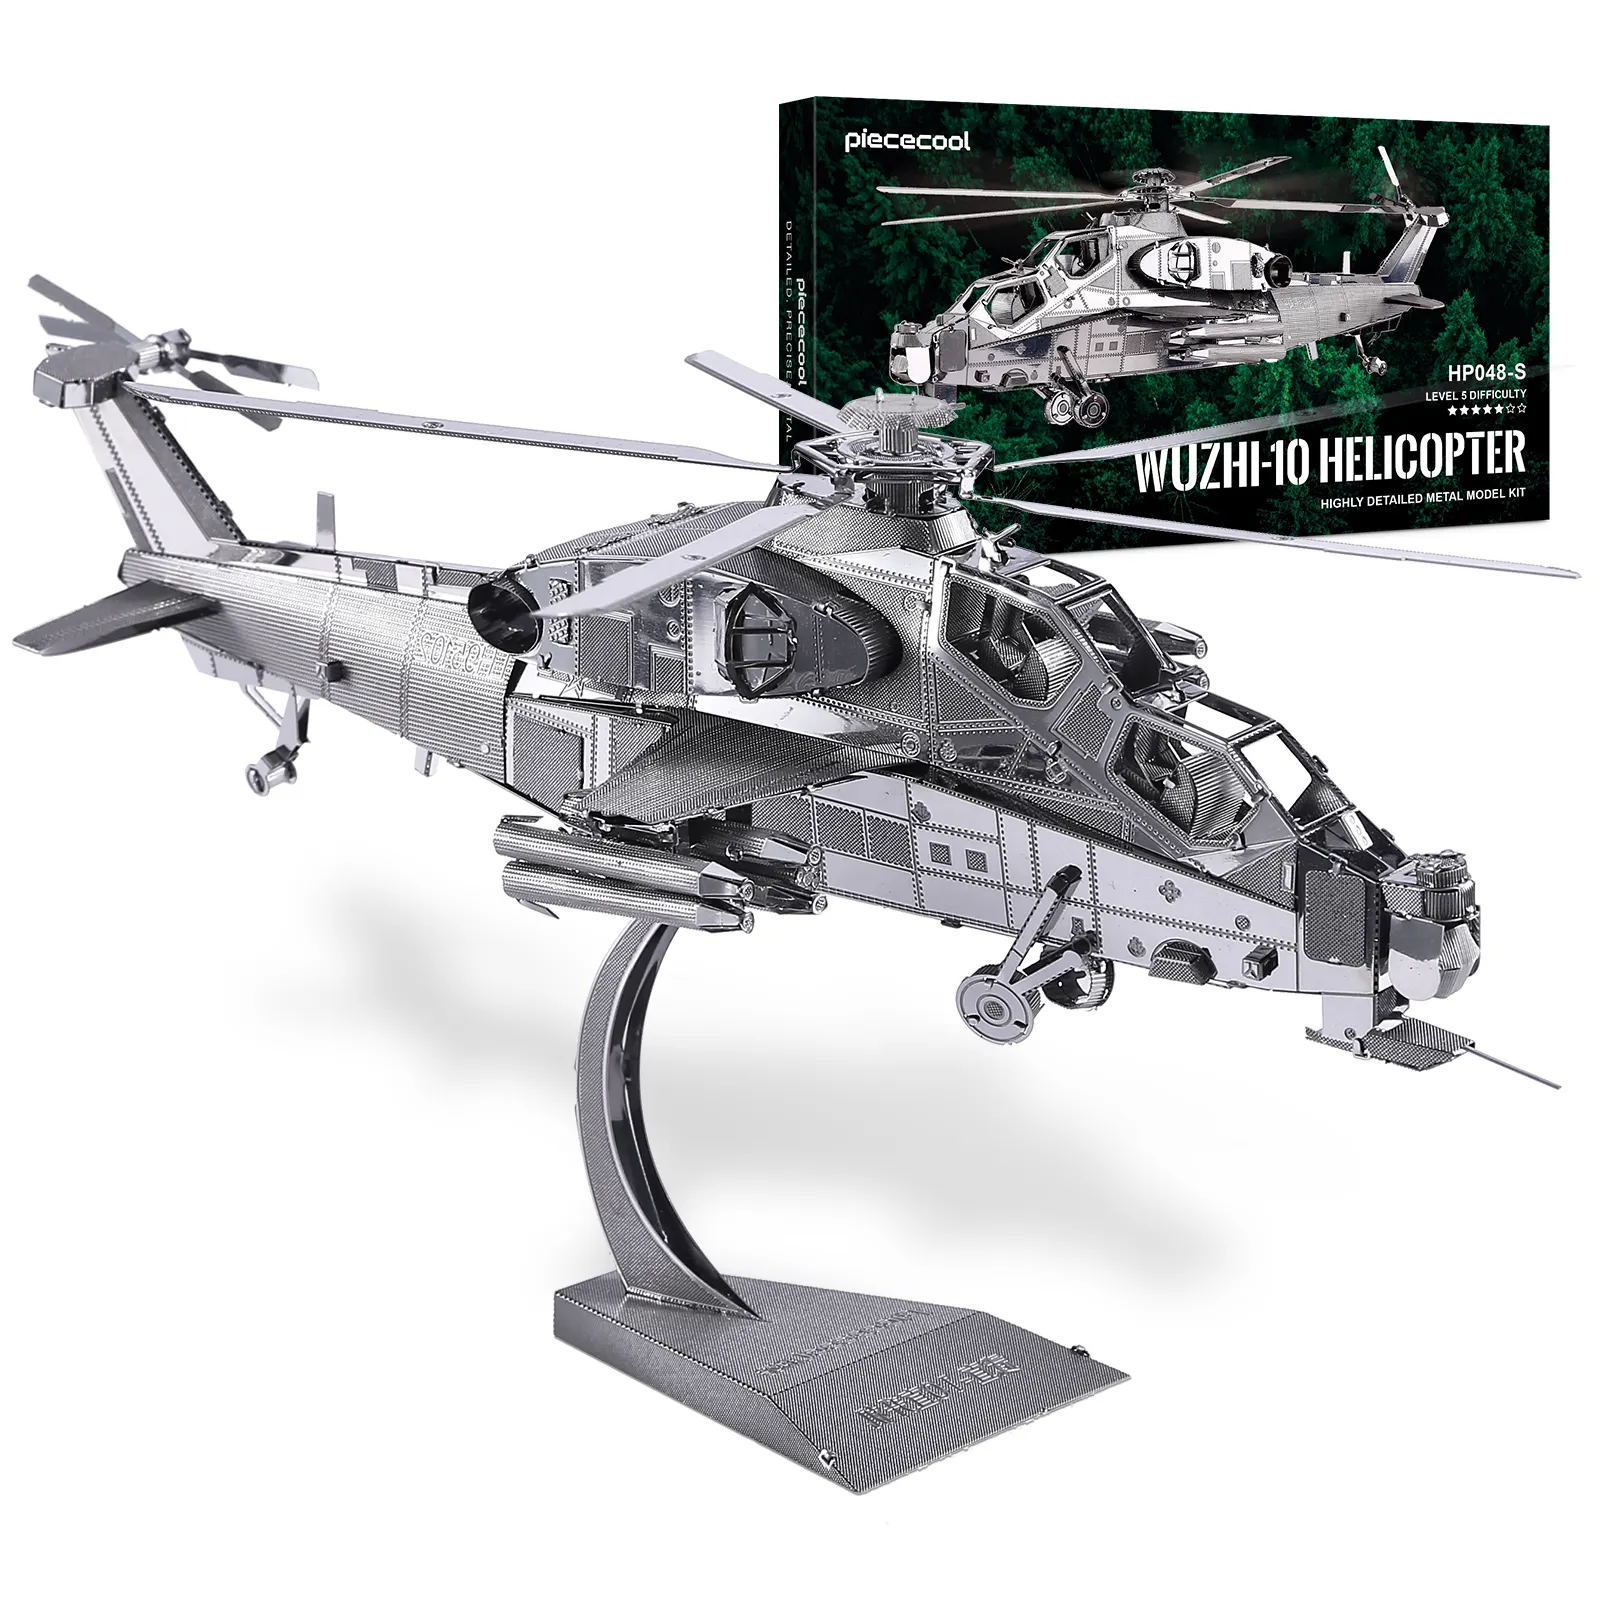 Piececool 3d puzzle maker military toy WUZHI-10 HELICOPTER 3d puzzles Metal assembly model for kids ages 14+